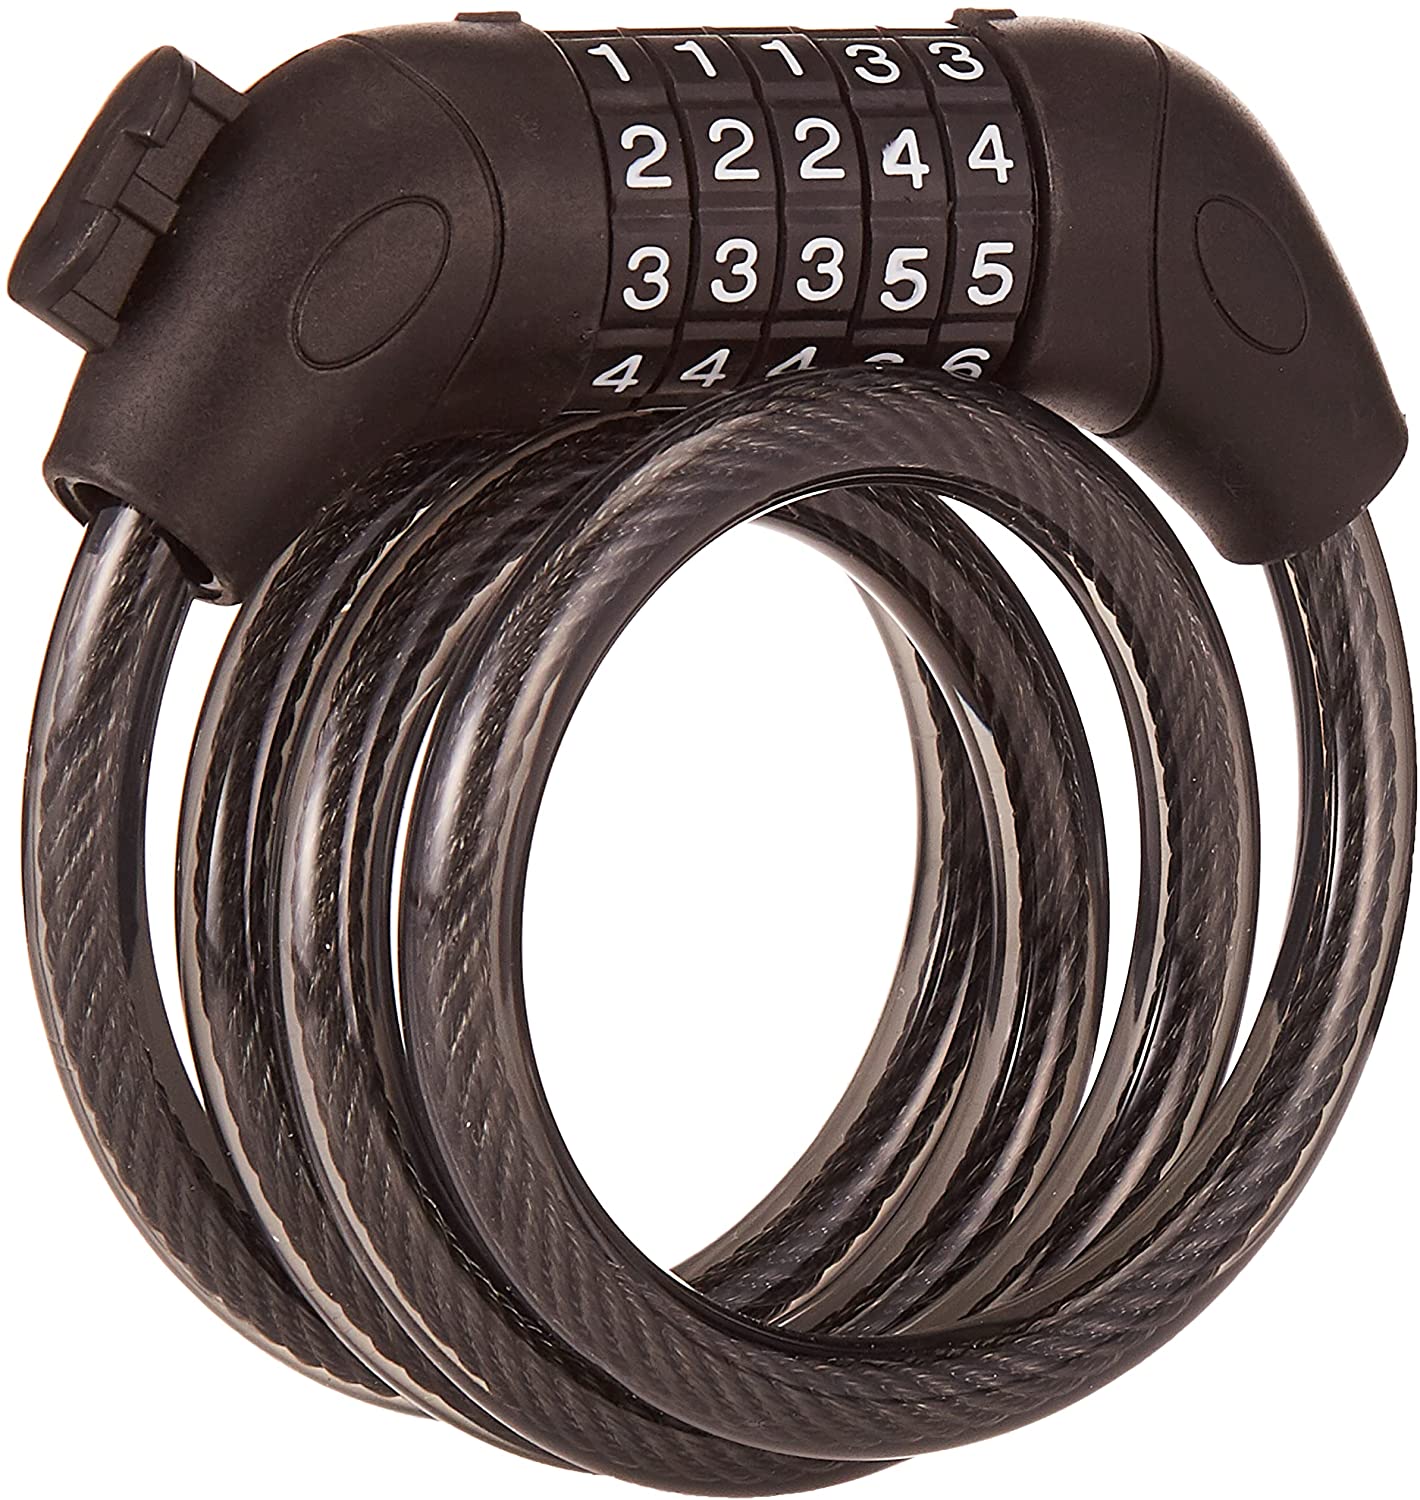 1.2M 5-Digit Code Bike Lock Coiling Resettable Combination Cable Bike Locks Anti Theft Cycling Password Lock - Black